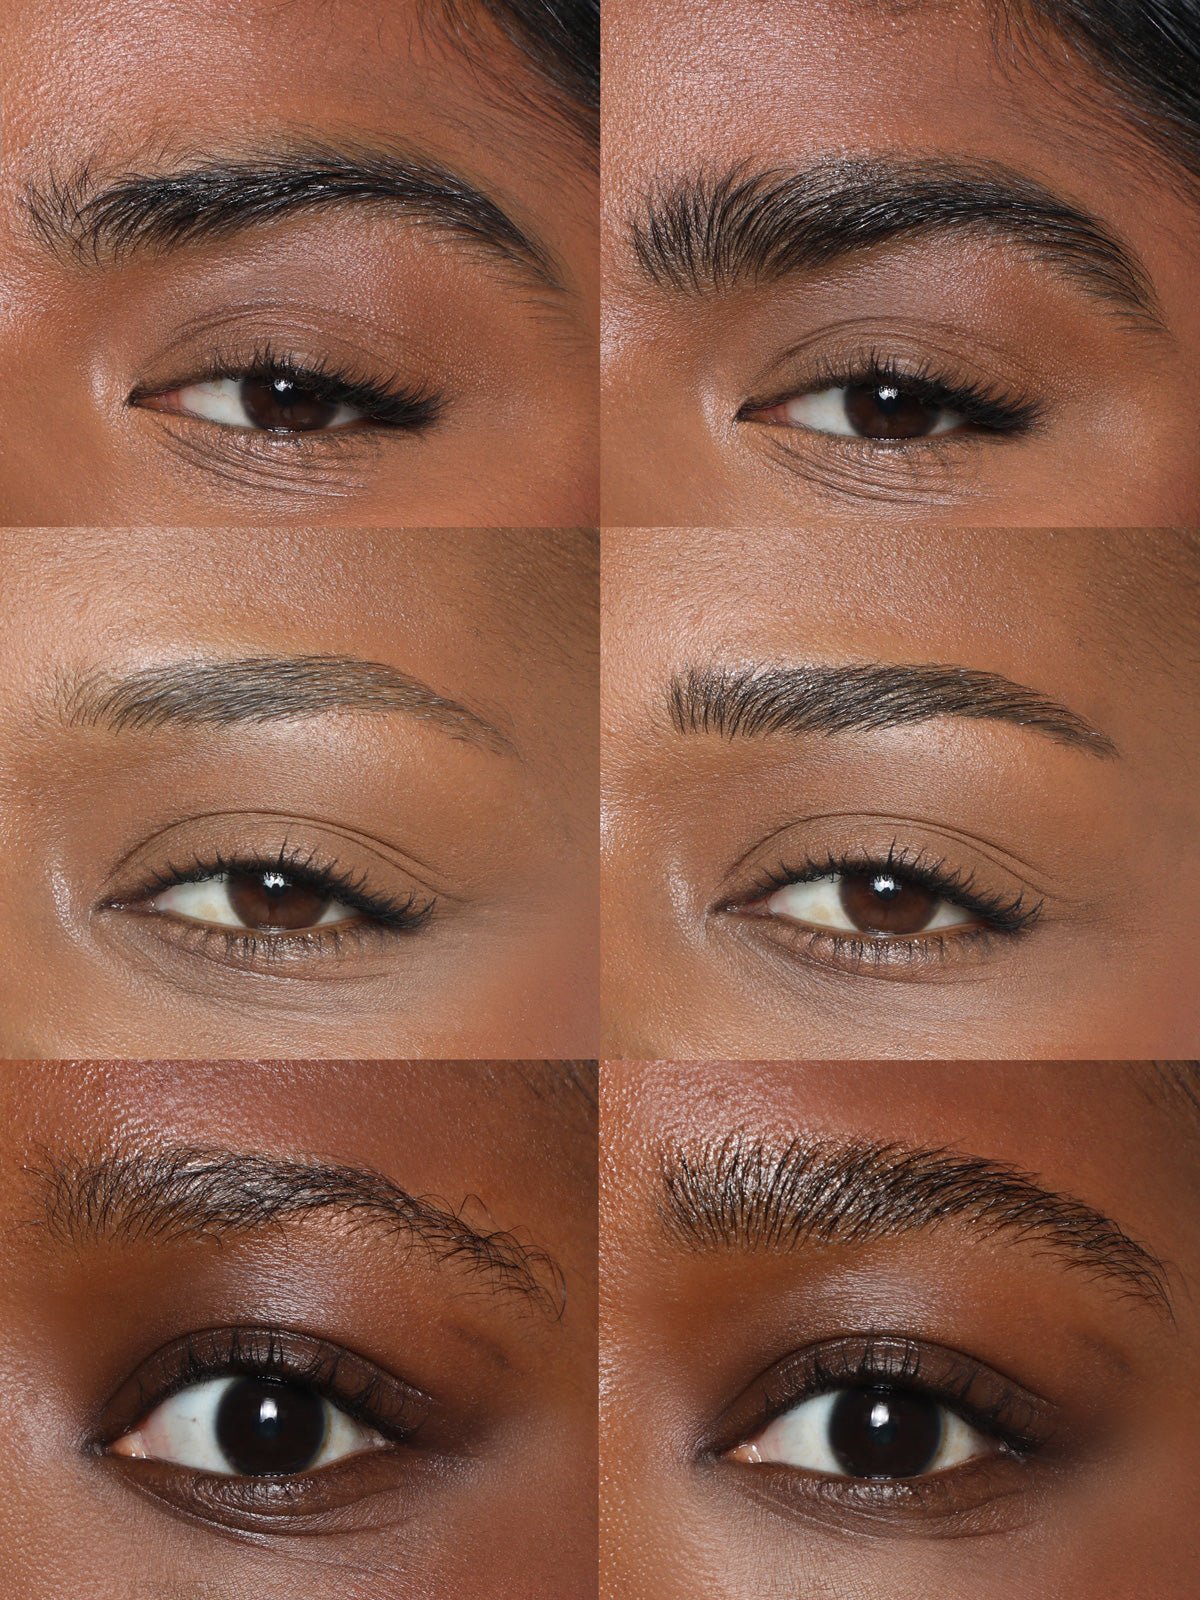 REFY Brow Tint in Black on Models Before & After